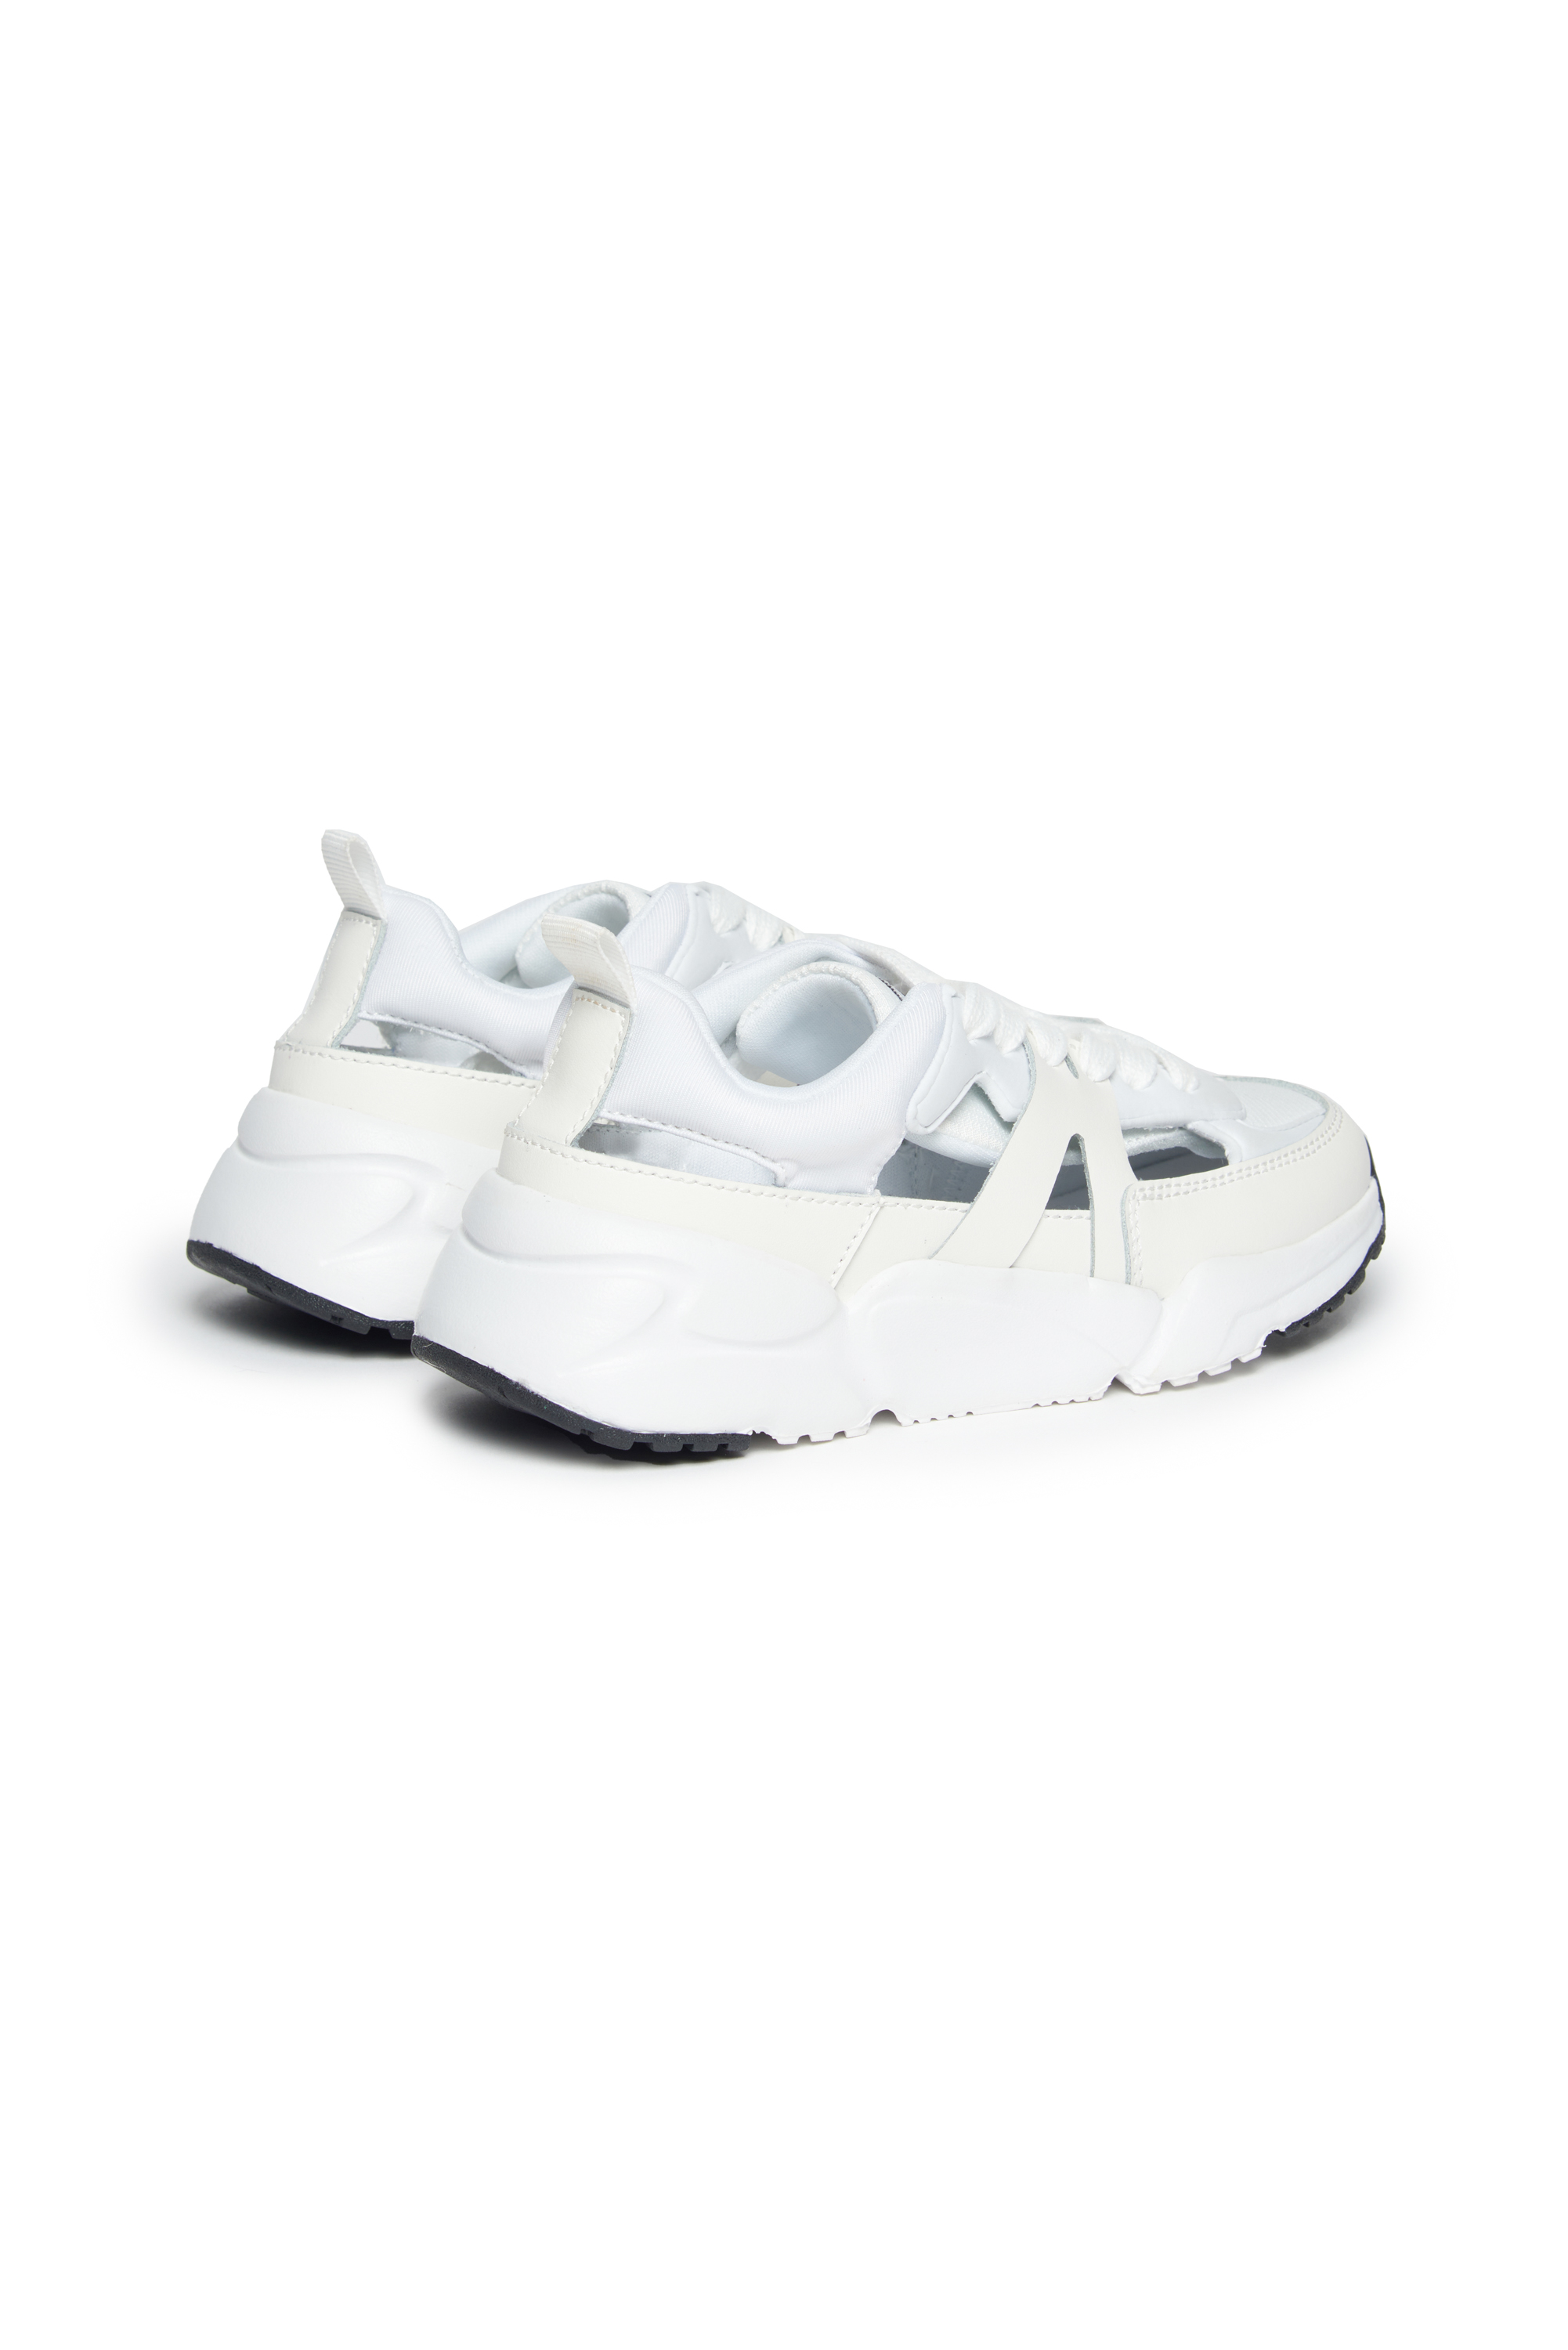 Diesel - S-MILLENIUM LCS PRO, Unisex Sandal sneaker in ripstop and leather in White - Image 3